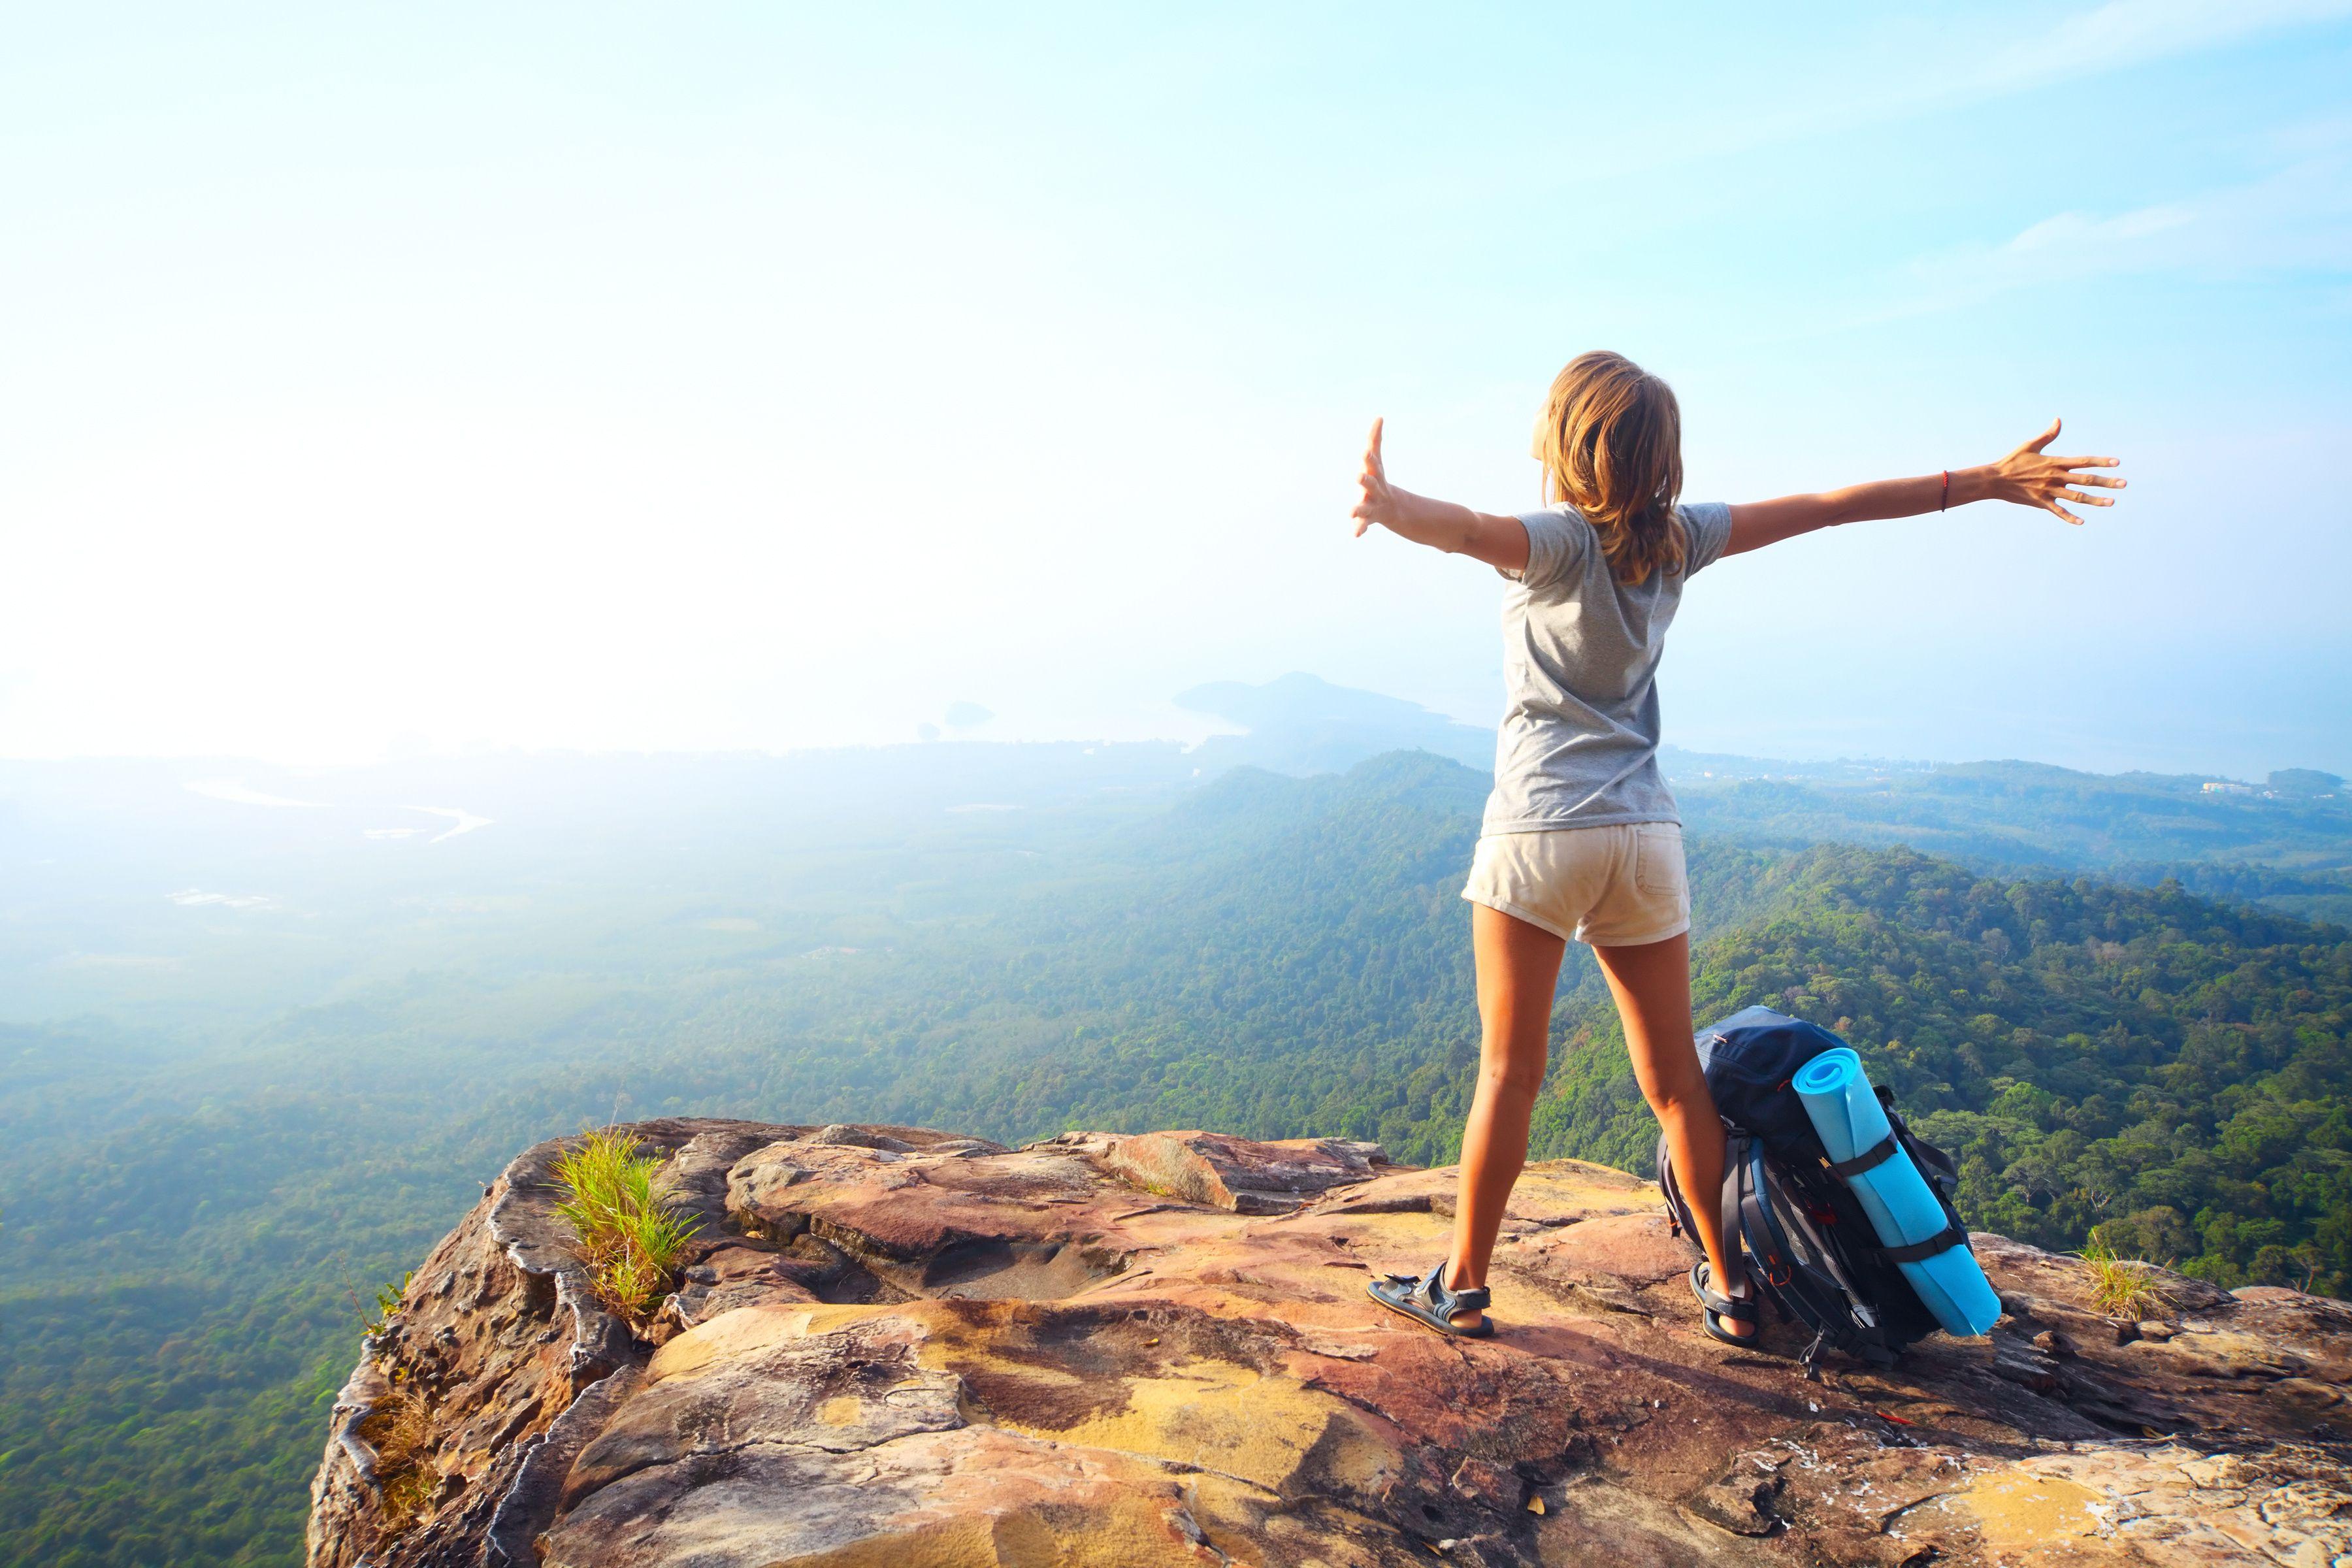 Download Wallpaper forest tree mountain rock girl stone sky backpack